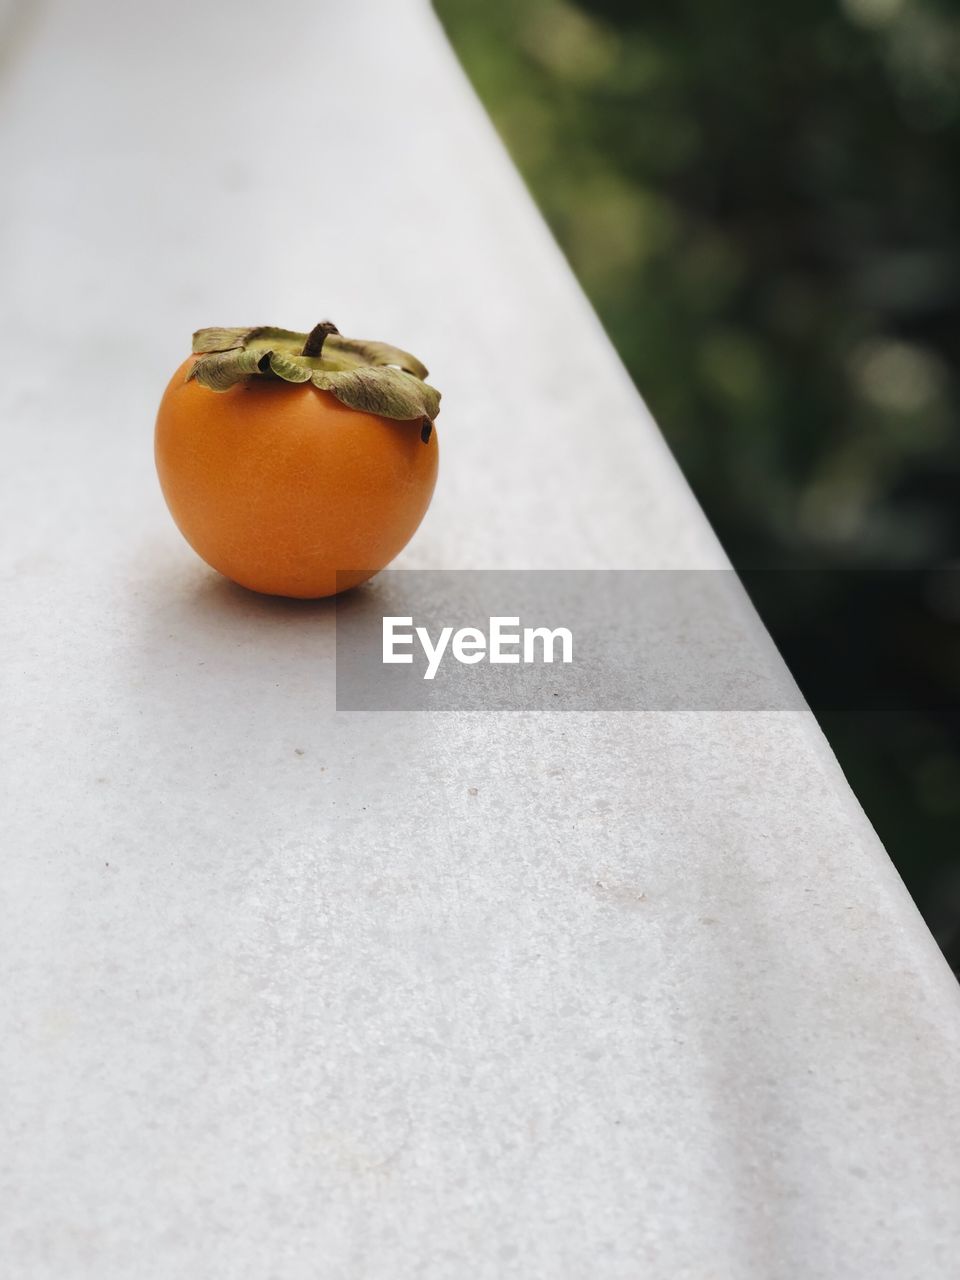 Close-up of persimmon on retaining wall outdoors